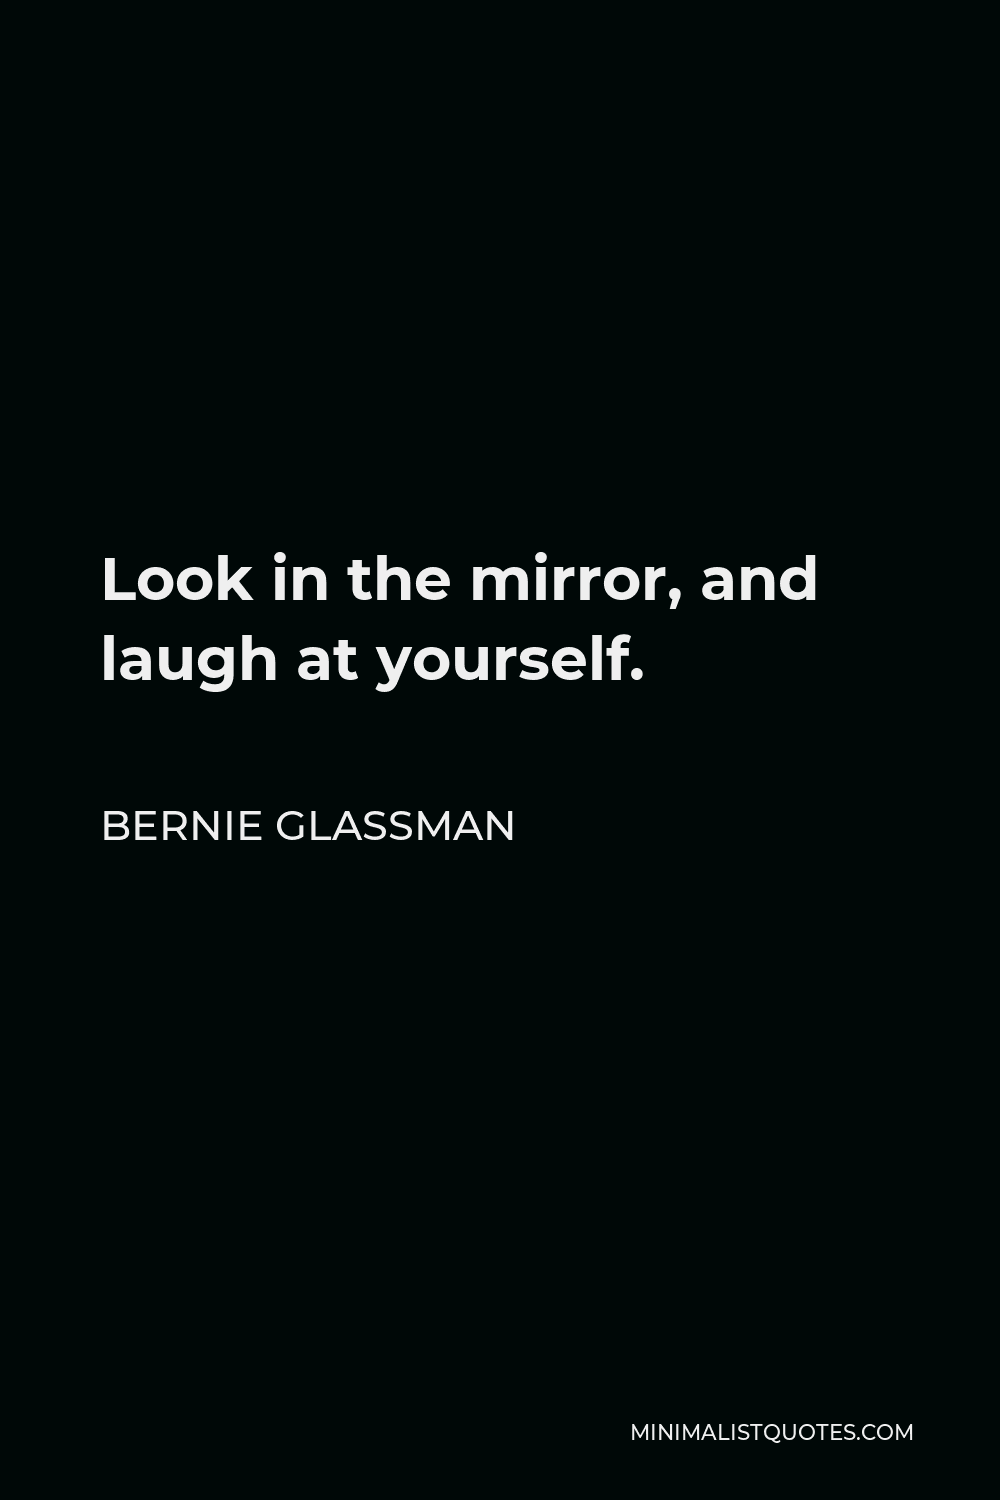 Bernie Glassman Quote - Look in the mirror, and laugh at yourself.